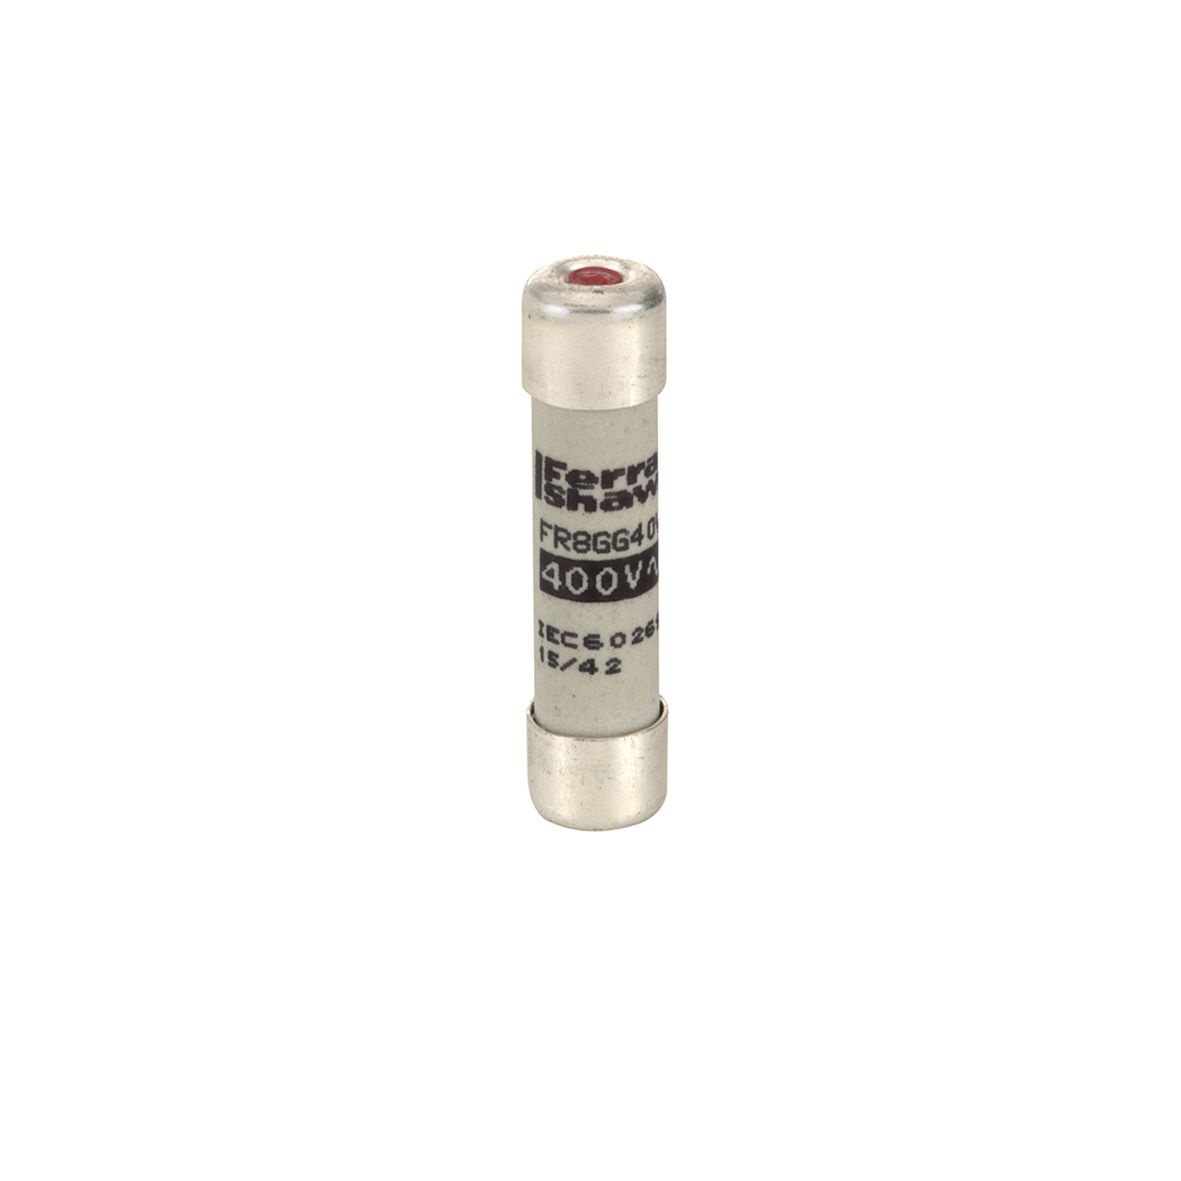 S216147 - Cylindrical fuse-link gG 400VAC 8.5x31.5, 25A with indicator